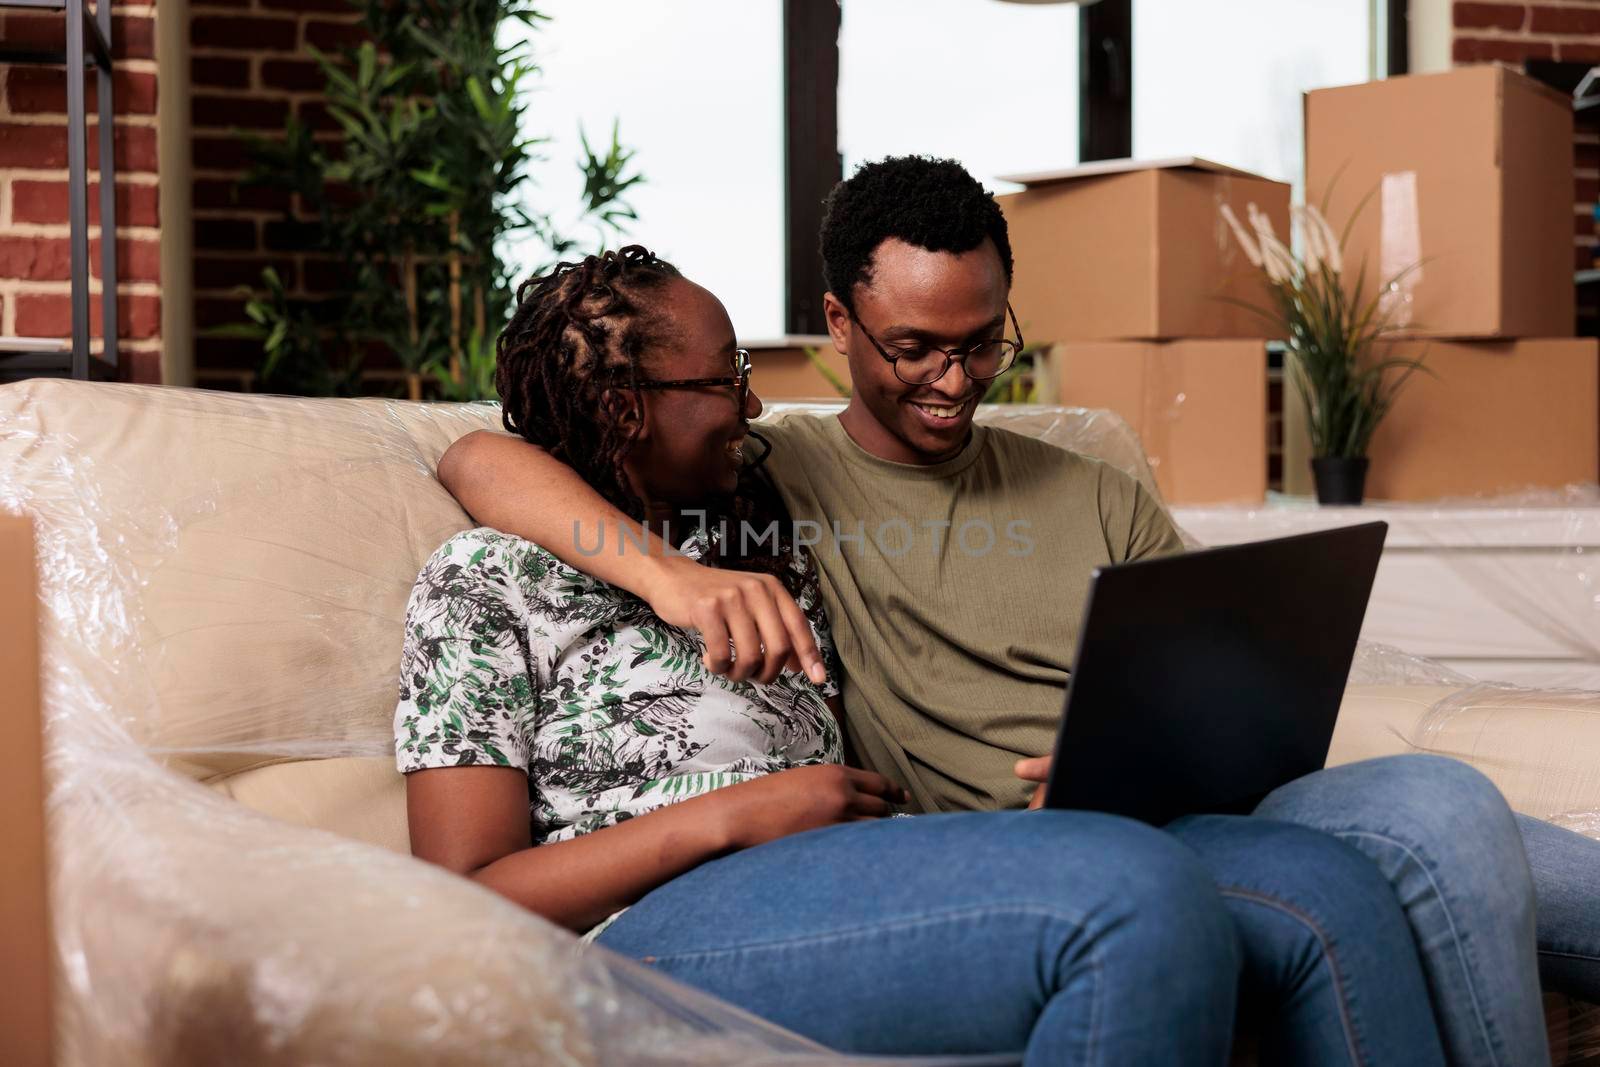 Happy married couple finding furniture on online website, shopping on laptop to decorate rented flat. Buying decorations on internet browser after moving in new household property.